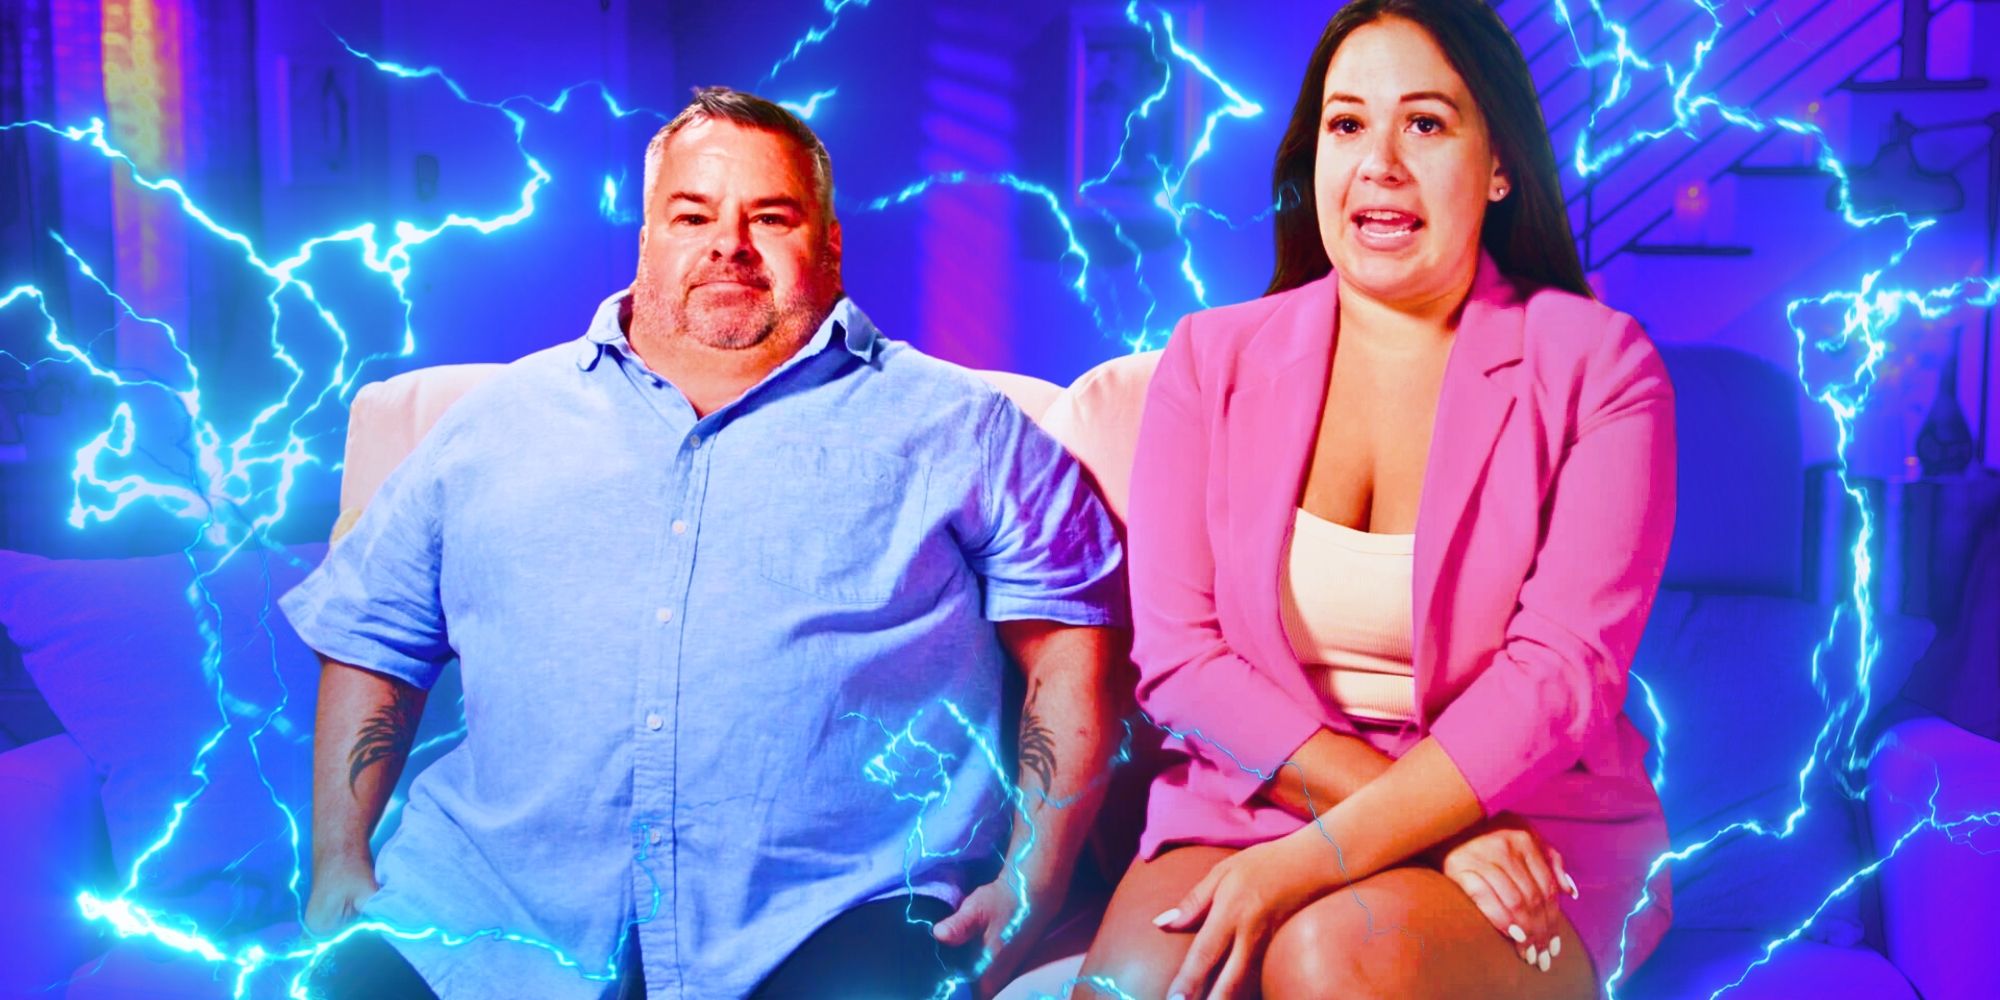 90 Day Fiancé: 8 Times Big Ed Brown Was The Worst (Before & After His Split From Liz Woods)